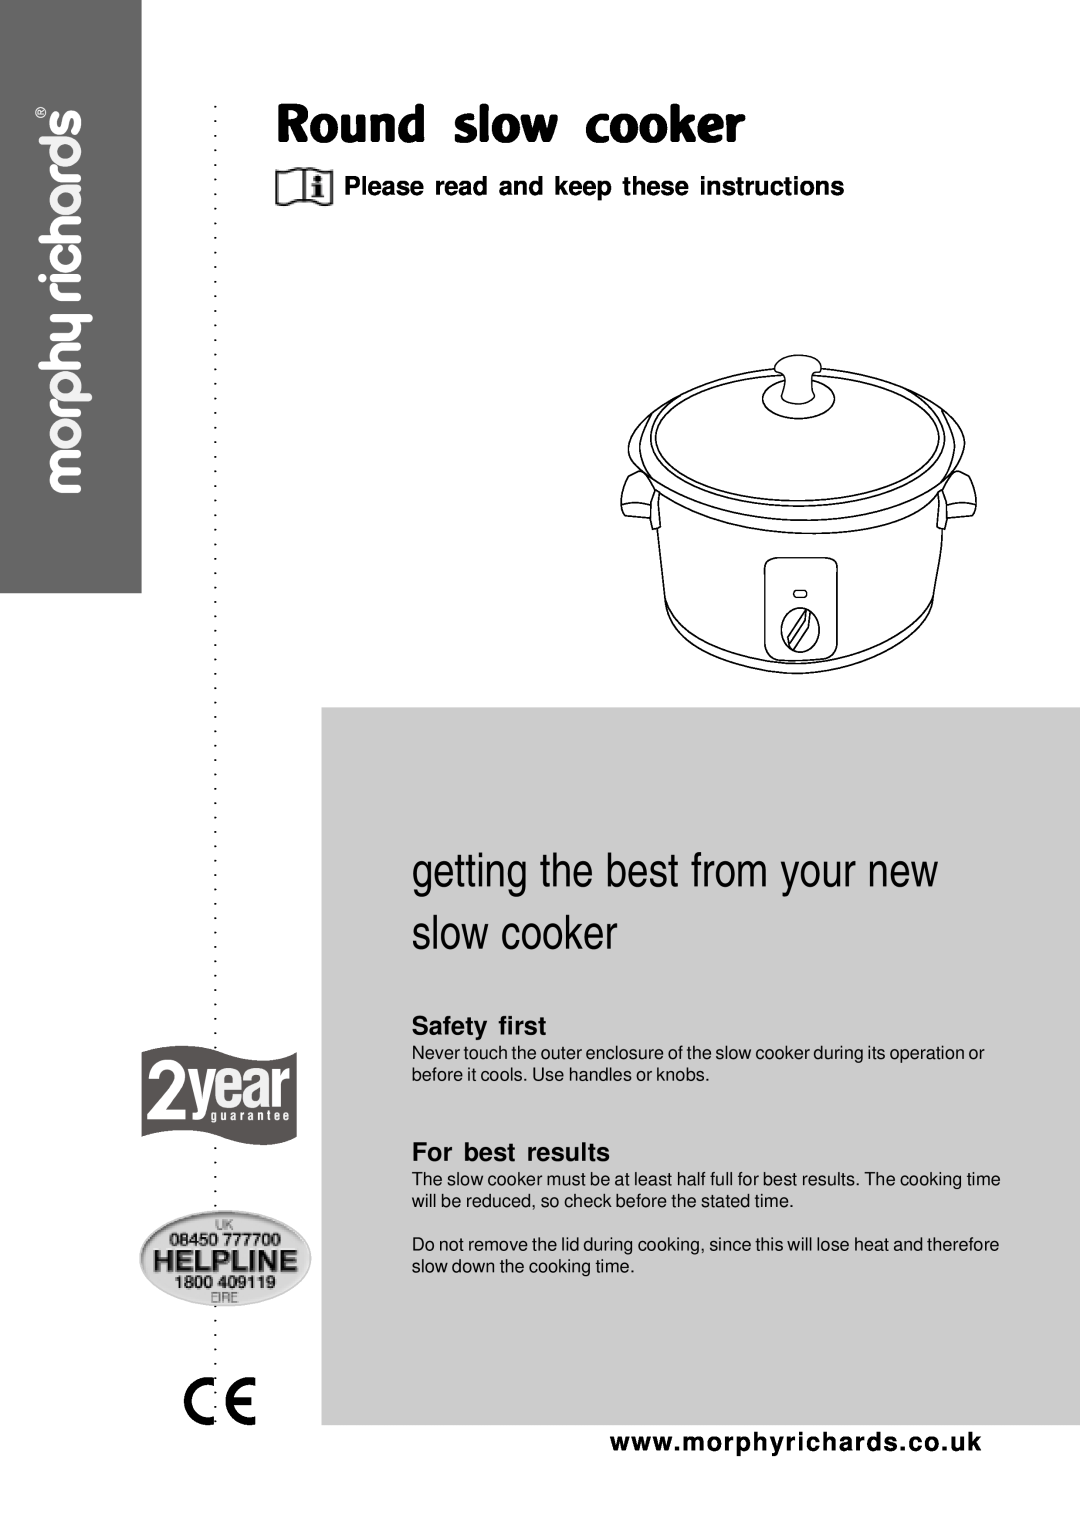 Morphy Richards Round slow cooker manual getting the best from your new slow cooker, Safety first, For best results 